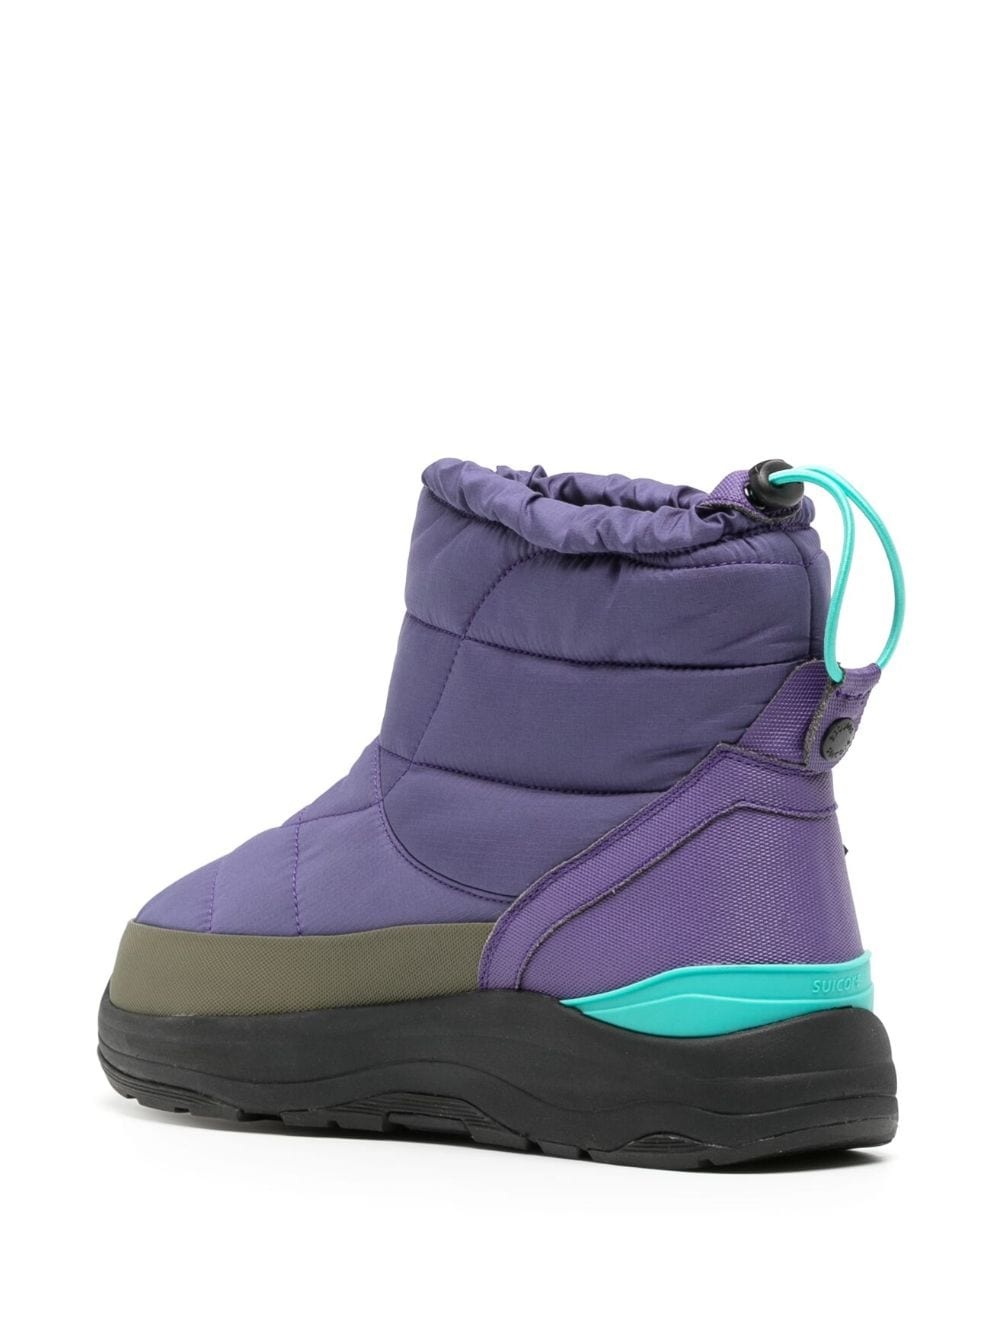 Bower padded snow boots - 3